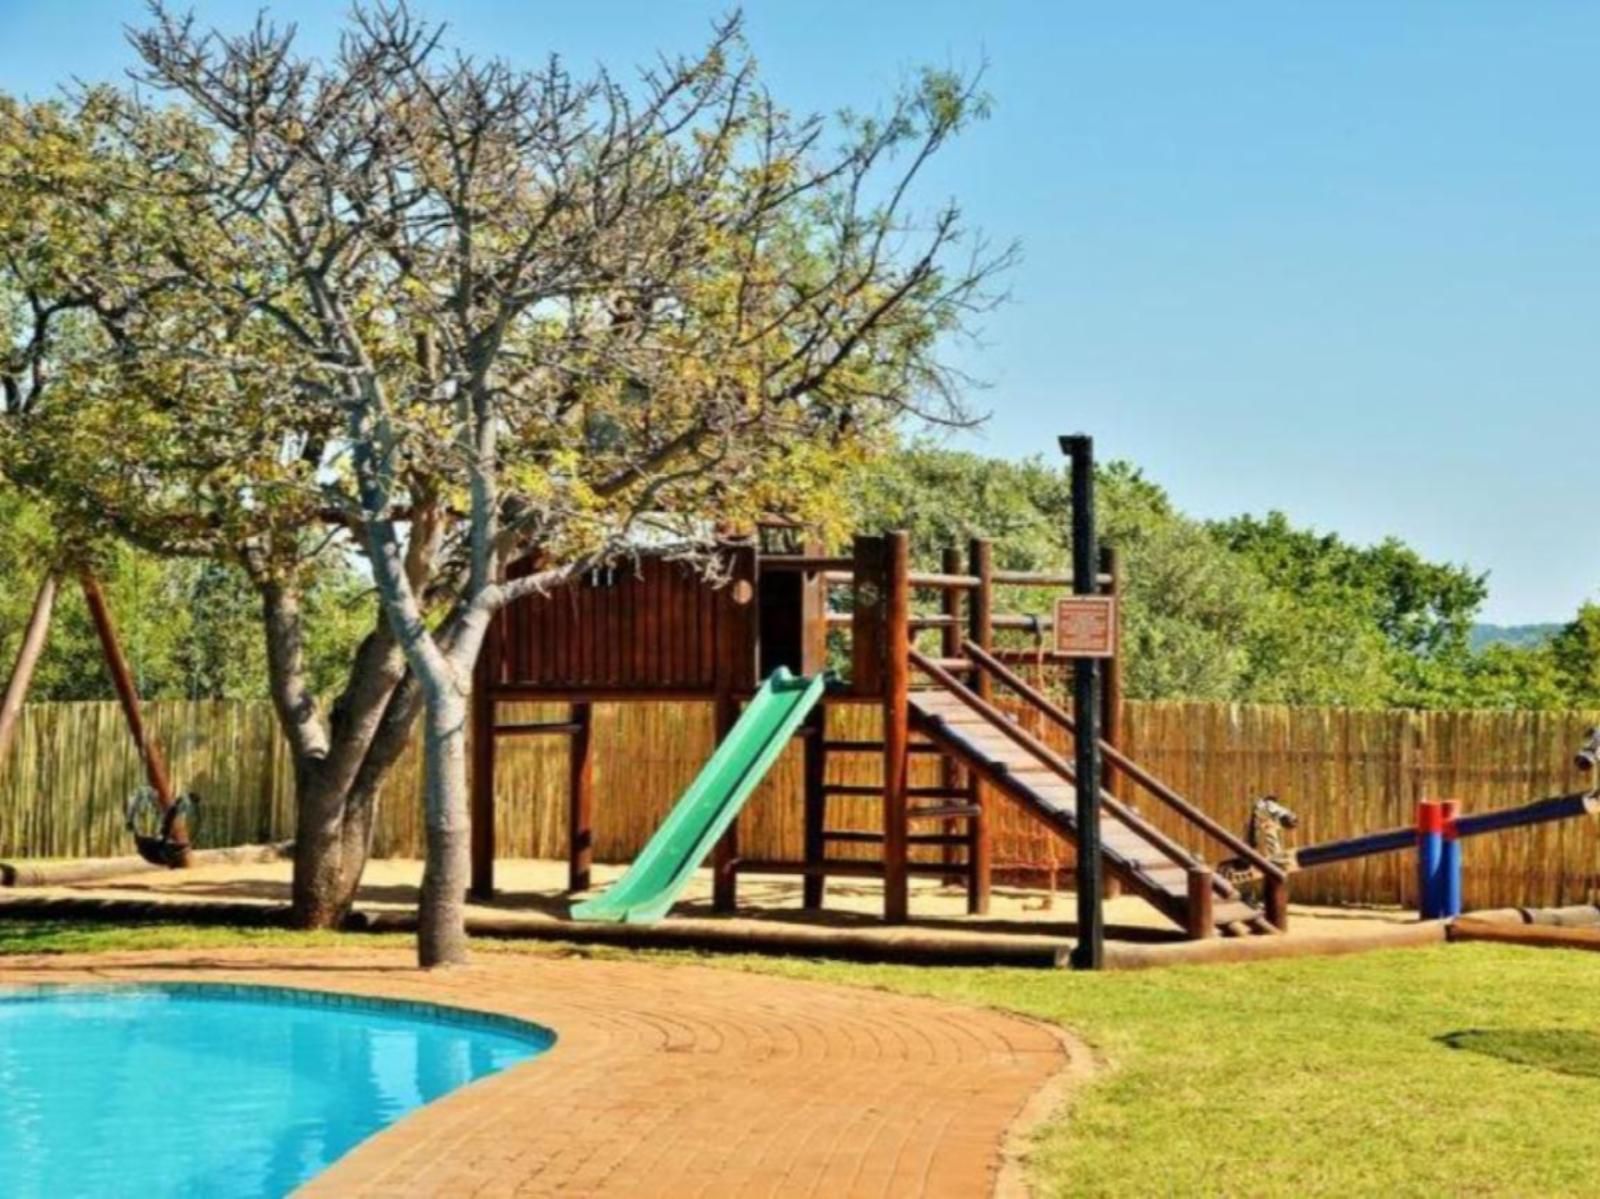 Bushtime At Mabula Mabula Private Game Reserve Limpopo Province South Africa Complementary Colors, Swimming Pool